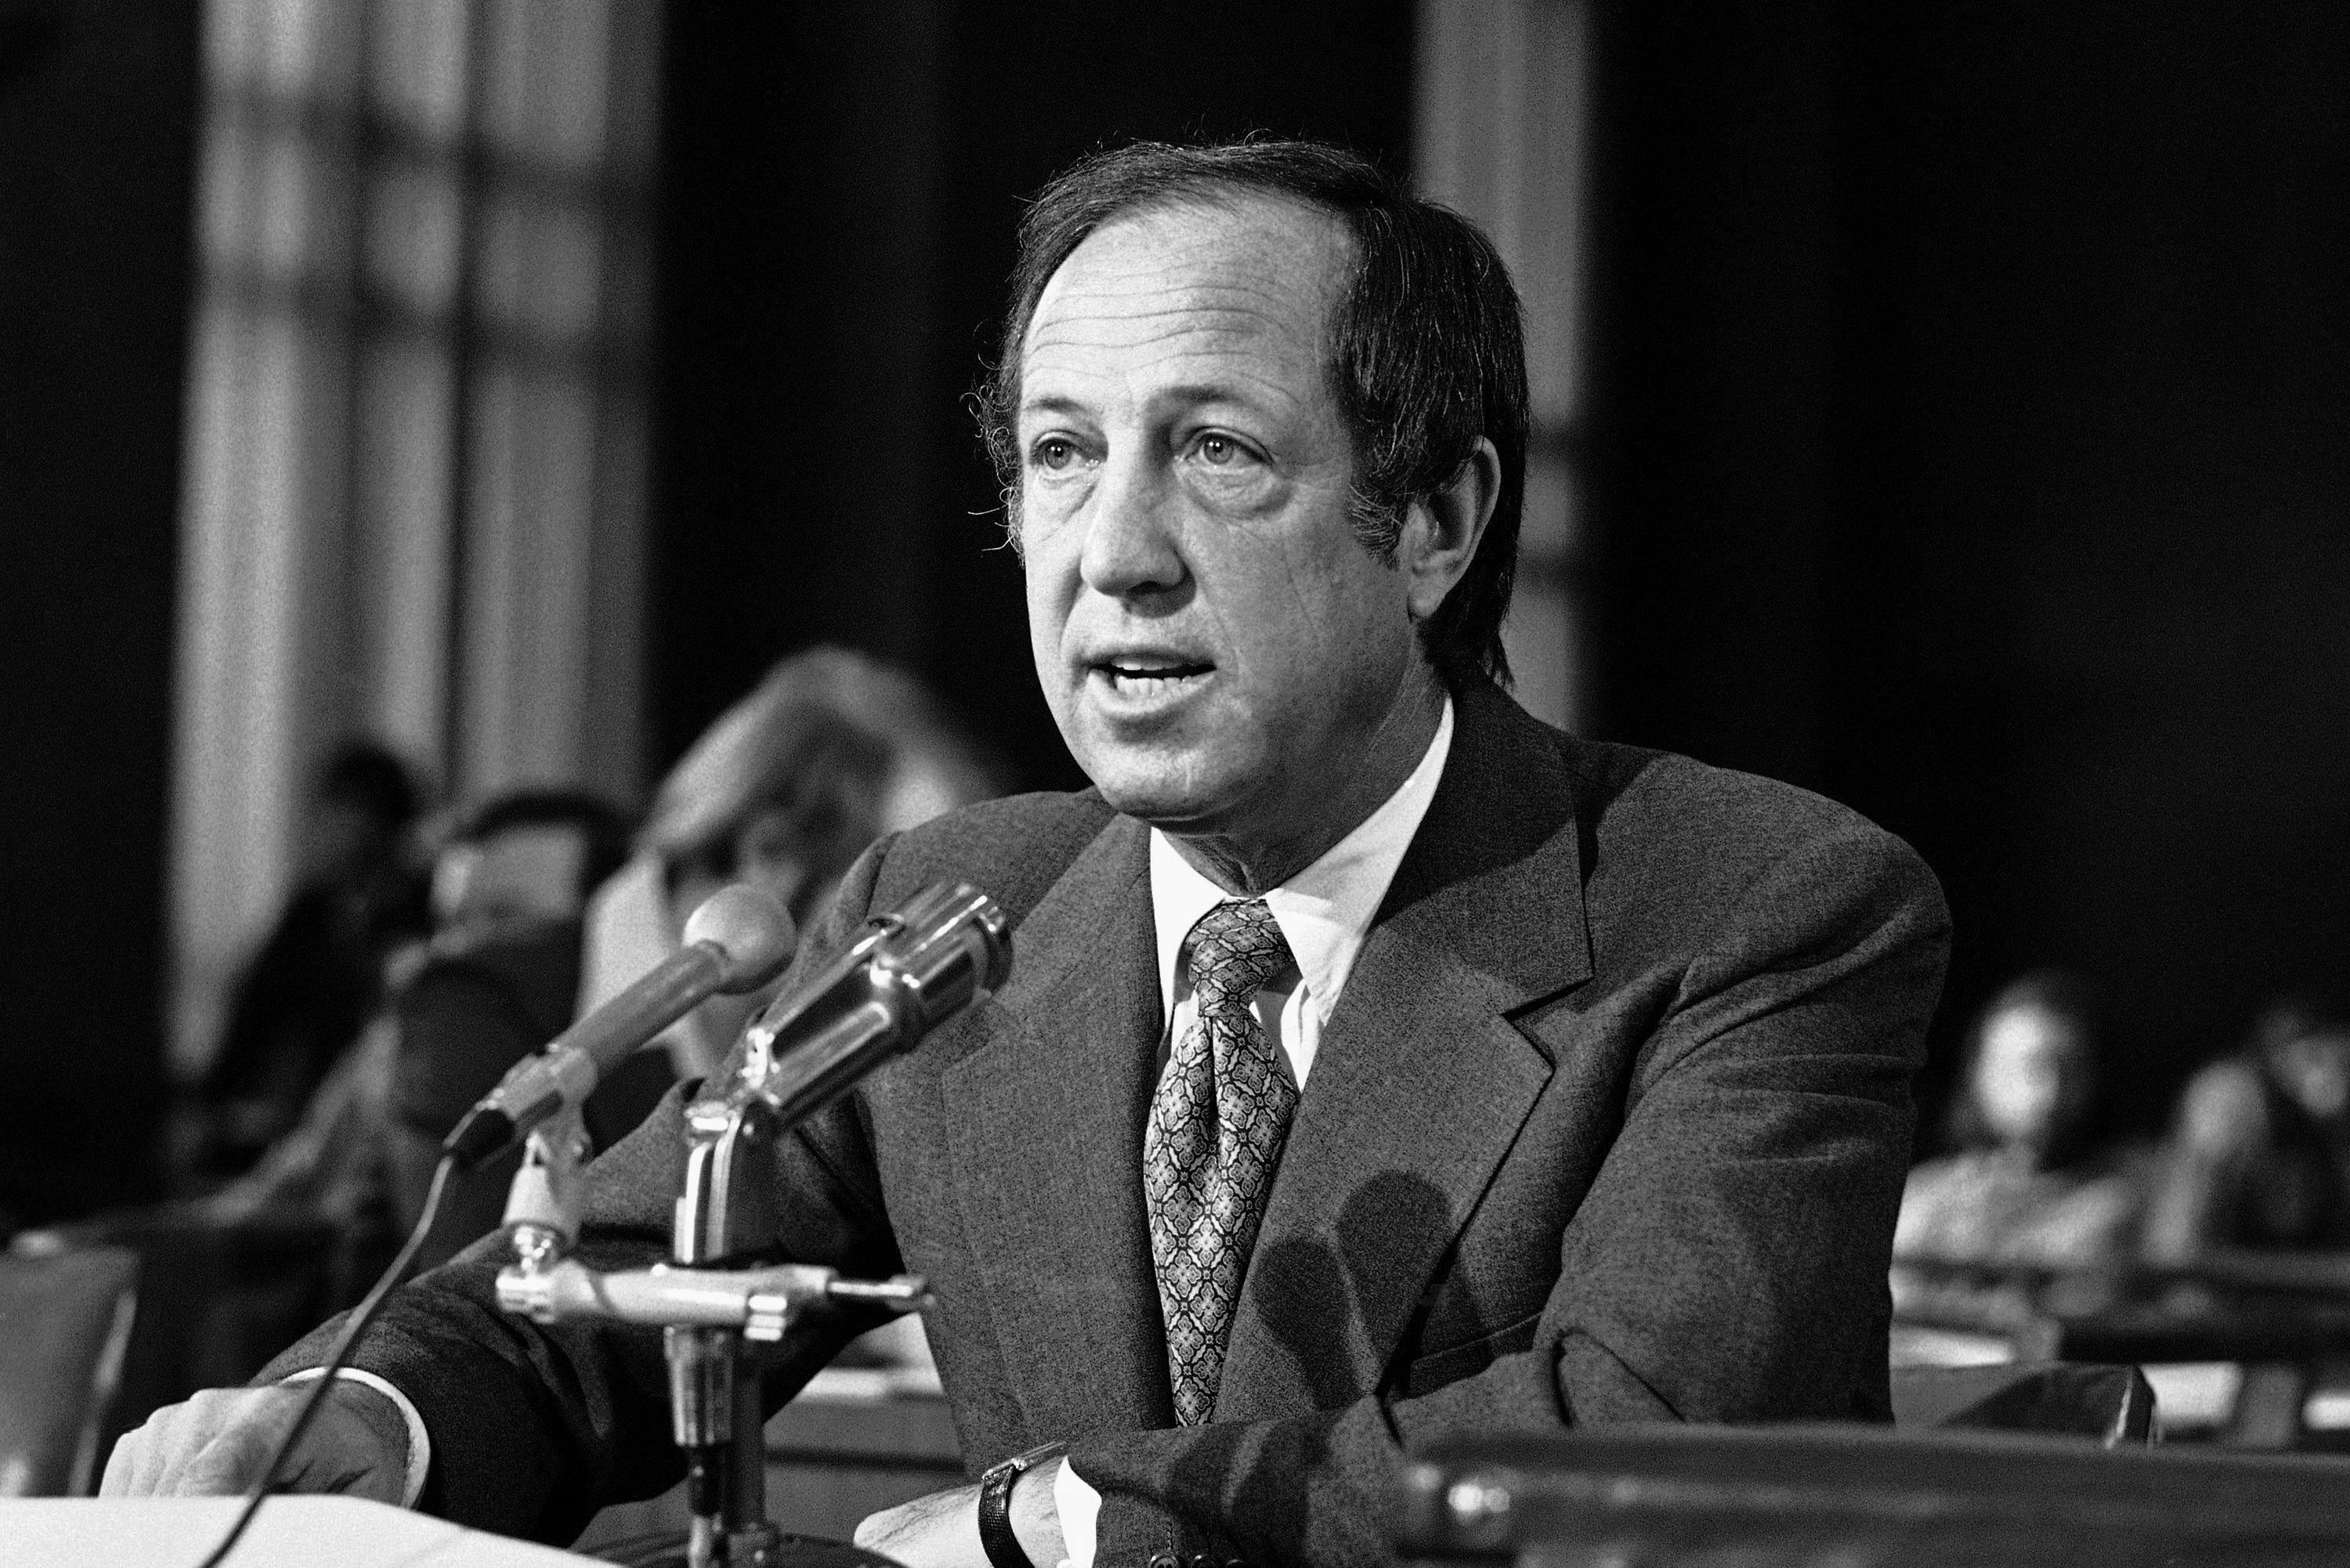 NFL Football Commissioner Pete RozeThen-NFL commissioner Pete Rozelle testifys before the National Gambling Commission in Washington on Wednesday, Feb. 20, 1975 on the legalization of sports gambling. Rozelle told the panel that legalized wagering poses a severe threat to the game. (AP Photo/HLG), testifys before the National Gambling Commission in Washington on Wednesday, Feb. 20, 1975 on the legalization of sports gambling. Rozelle told the panel that legalized wagering poses a severe threat to the game. (AP Photo/HLG)